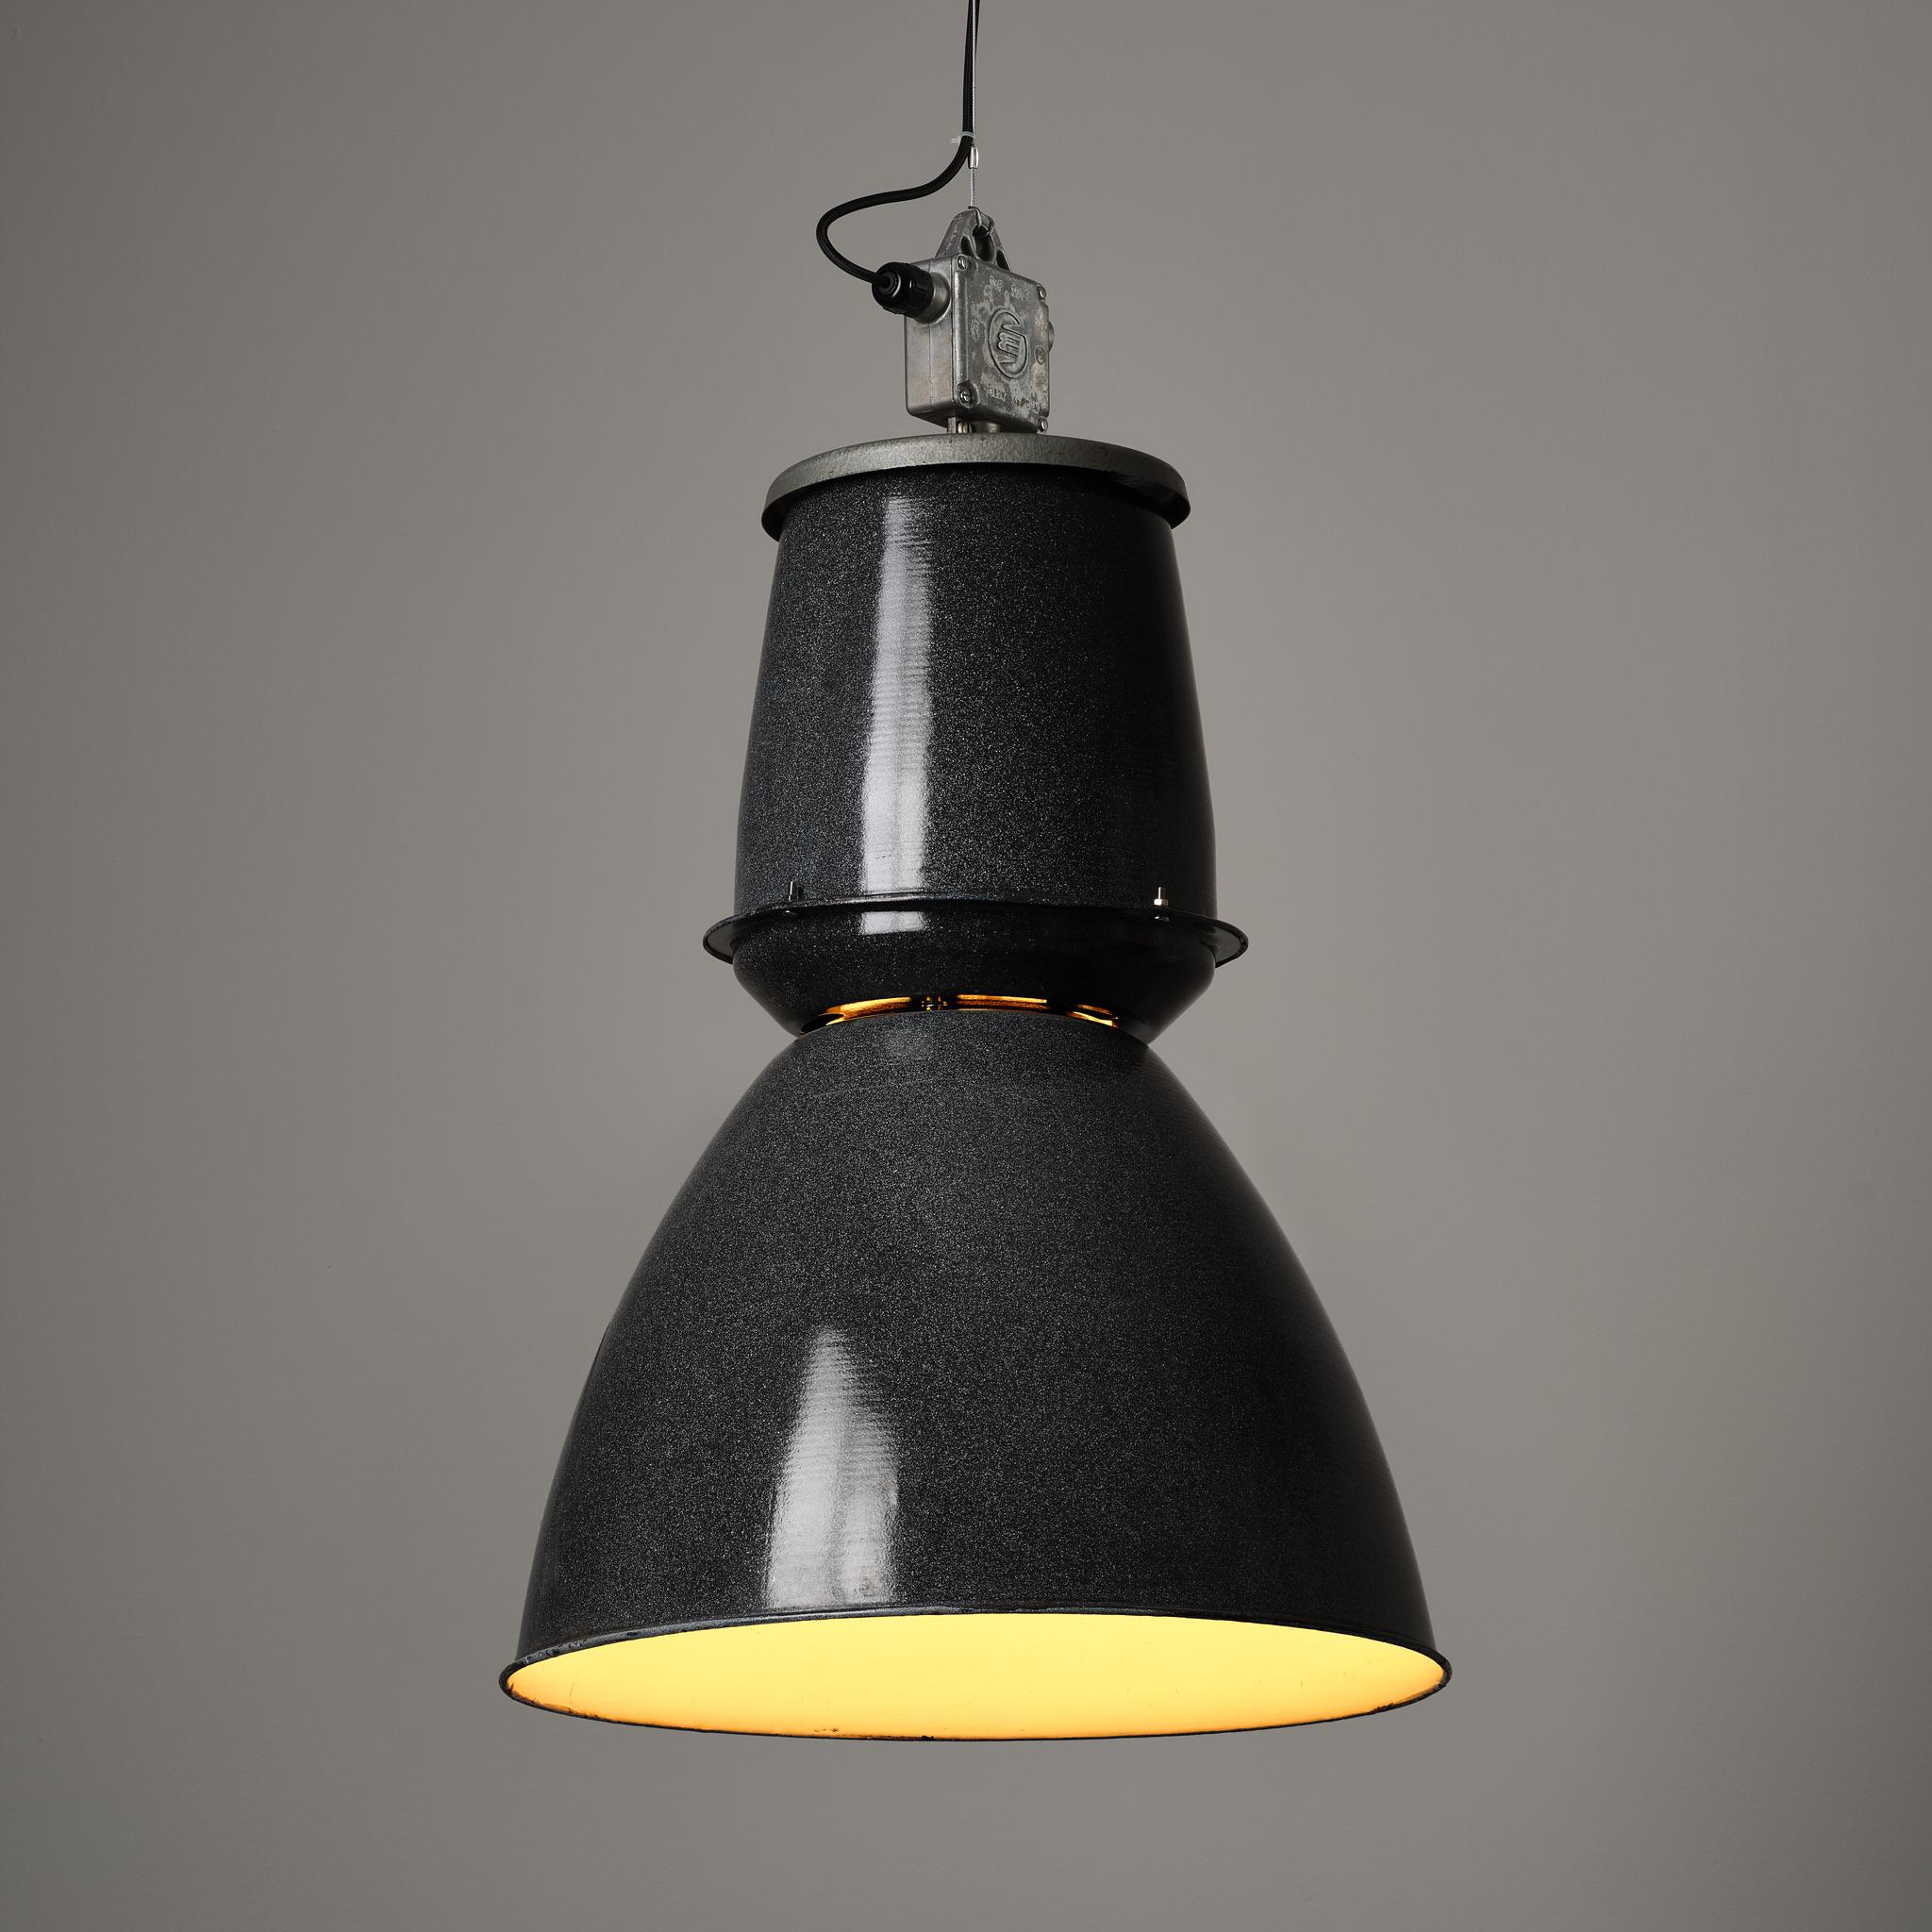 Substantial vintage industrial pendant lights reclaimed from communist-era factories in the Czech Republic. An Eastern Bloc design classic.

Original black/grey enamel. Cleaned and re-wired to the usual Trainspotters standards but otherwise